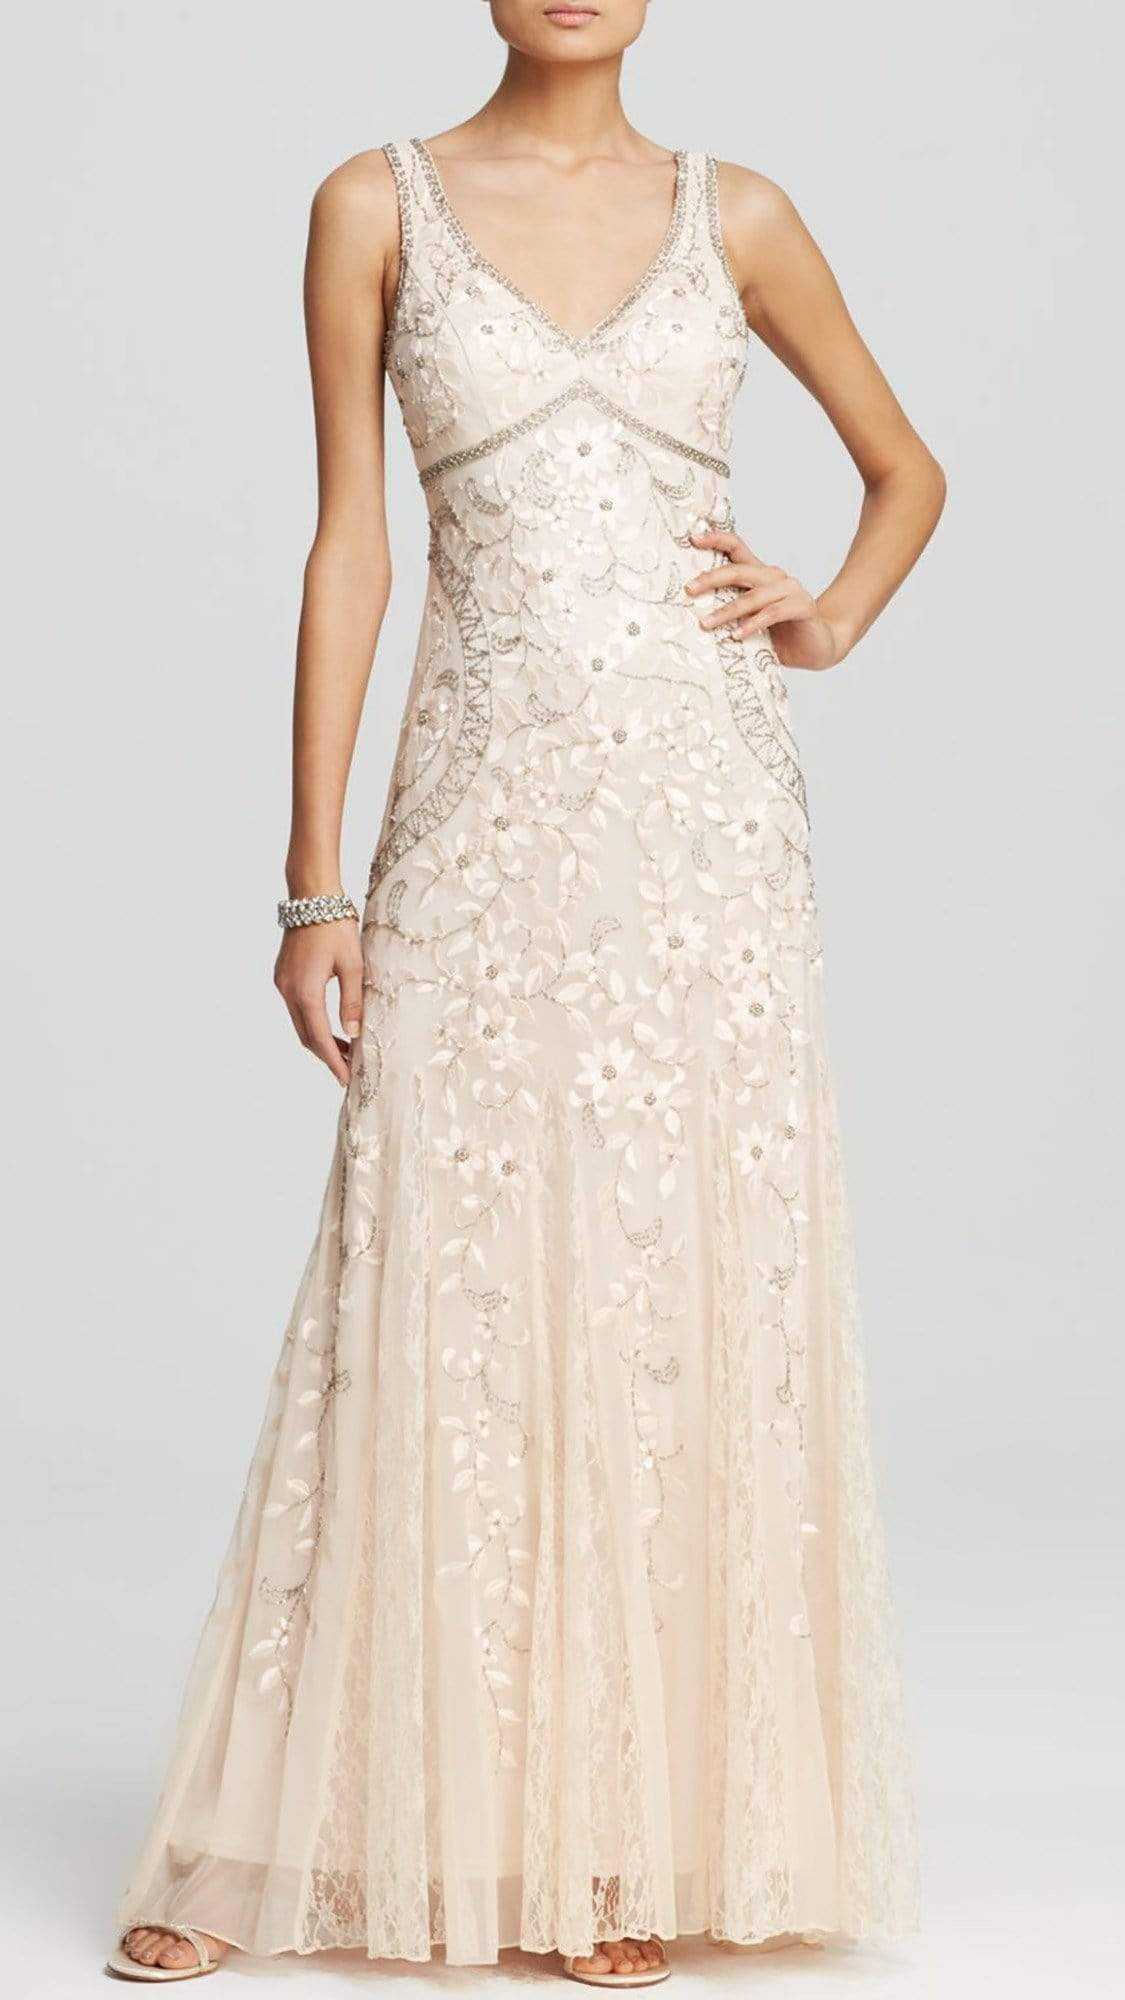 Sue Wong, Sue Wong Sleeveless Embellished Long Dress N1118 - 1 pc Ivory in Size 6 available